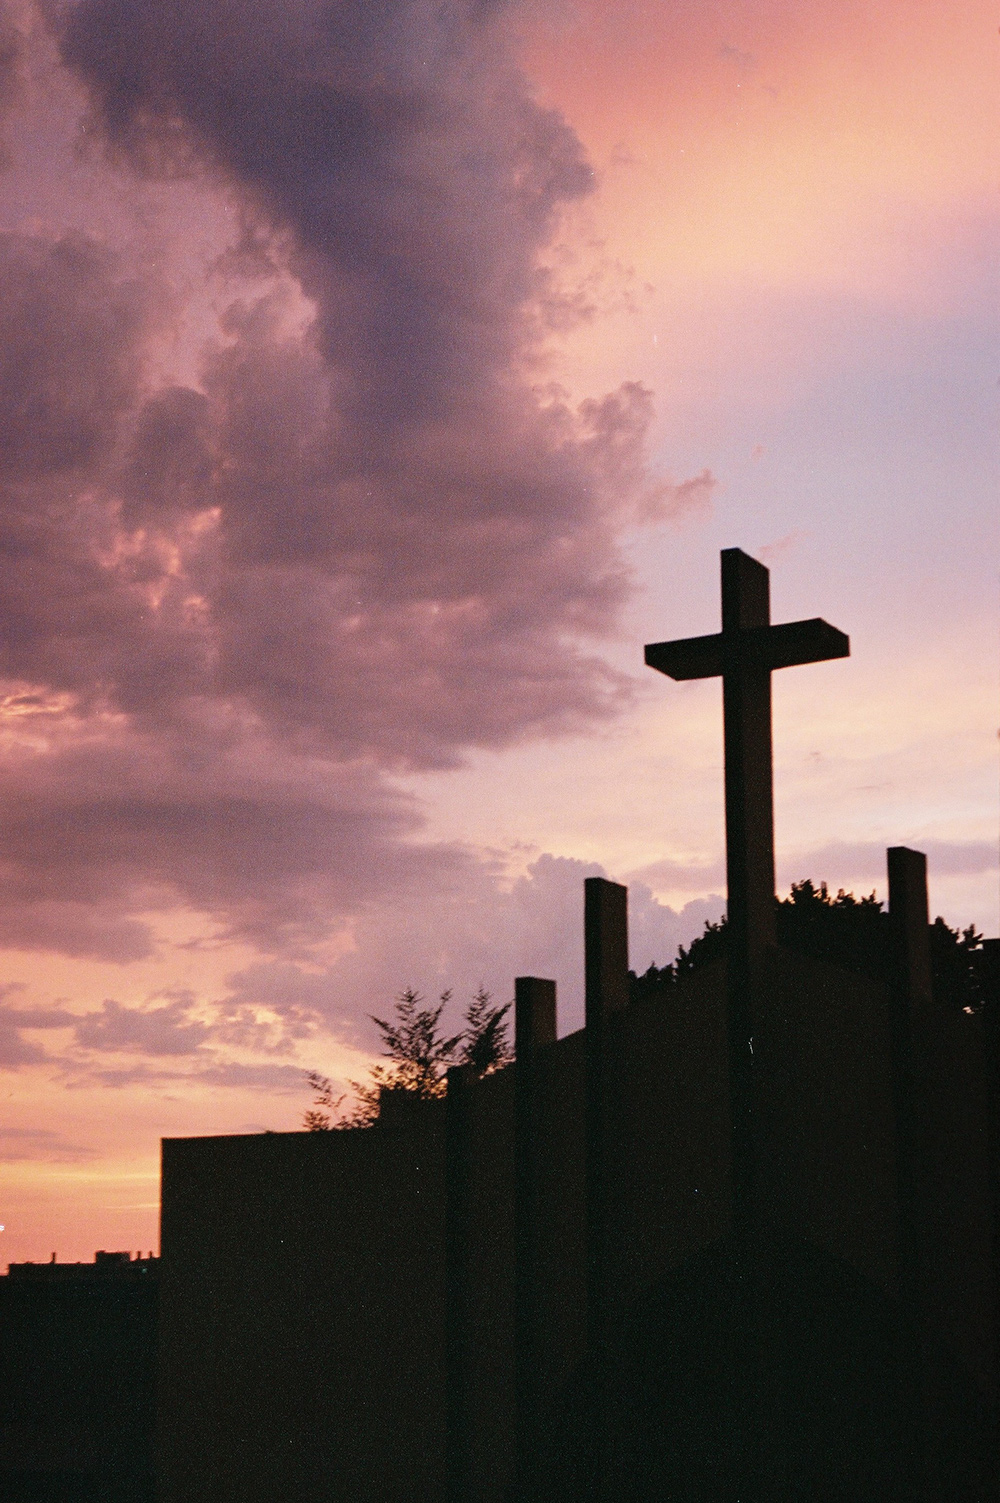 Analog photo of a church's cross silhouetted against a pink sky.